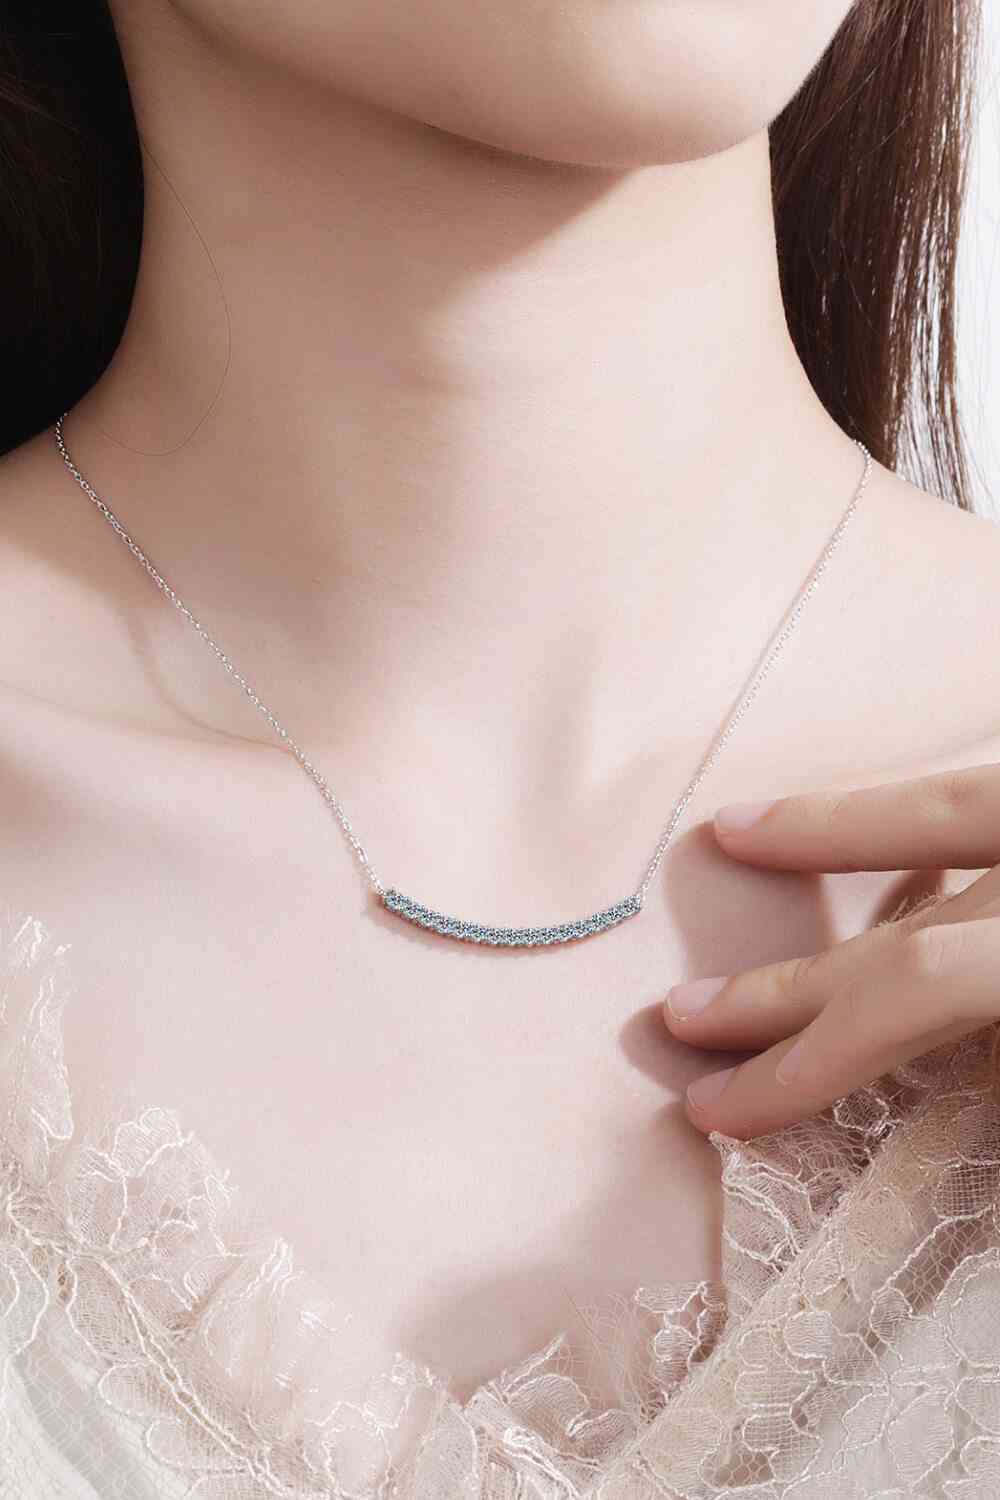 Sterling Silver Curved Bar Necklace - Pahabu